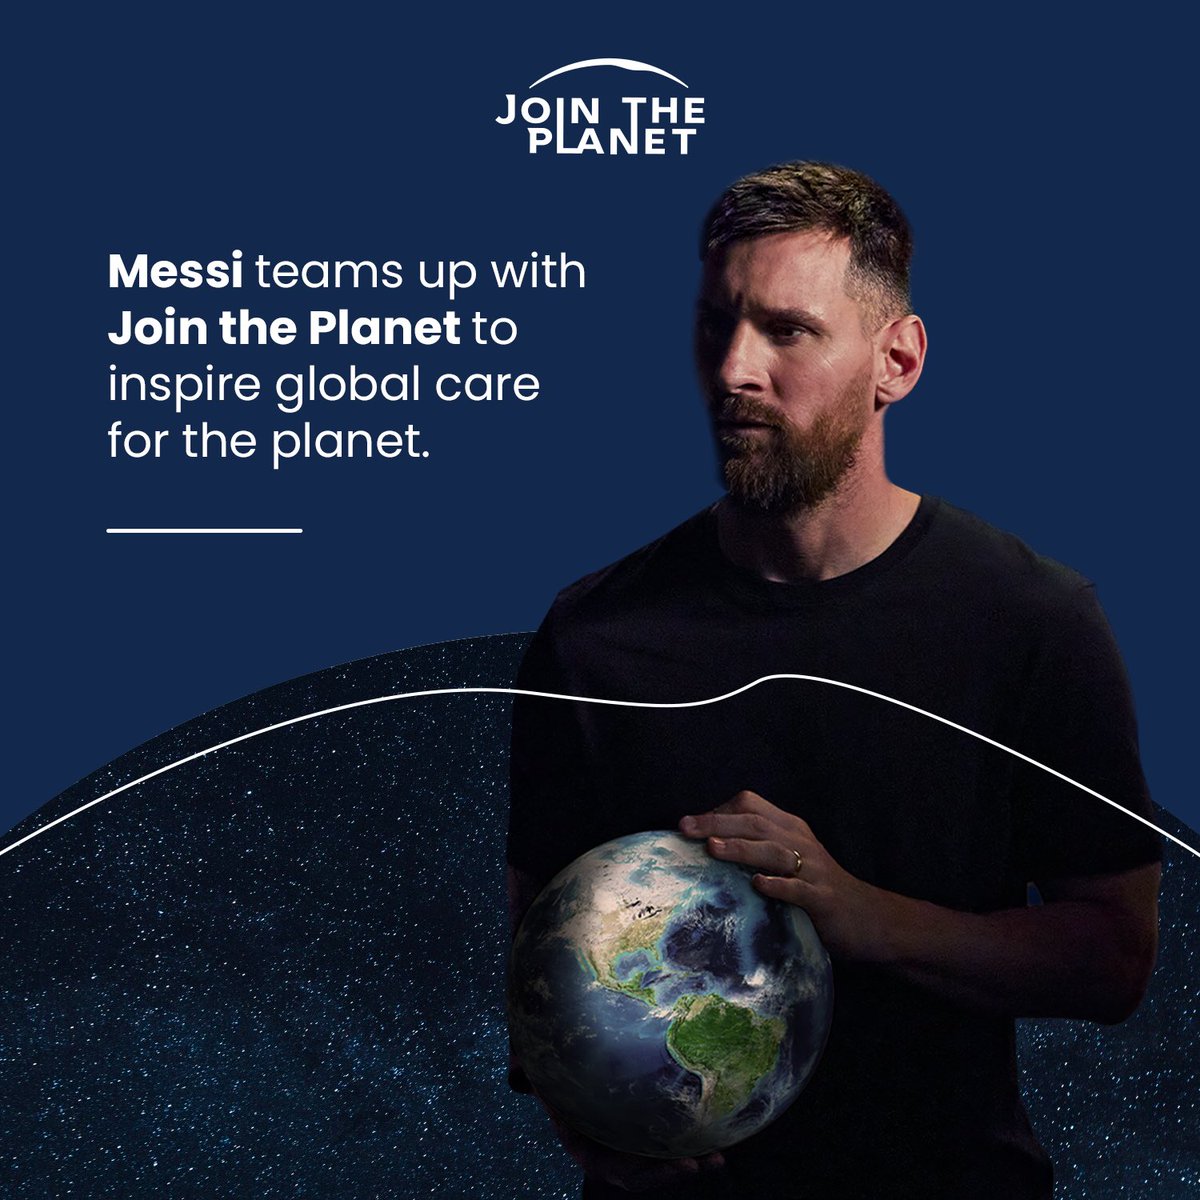 The collaboration between Messi and Join the Planet will support our mission and projects: upcycling discarded materials to create high-quality products, generating resources to support ecological projects. Stay tuned!

#JoinThePlanet #SustainabilityNow #ChangeMakers